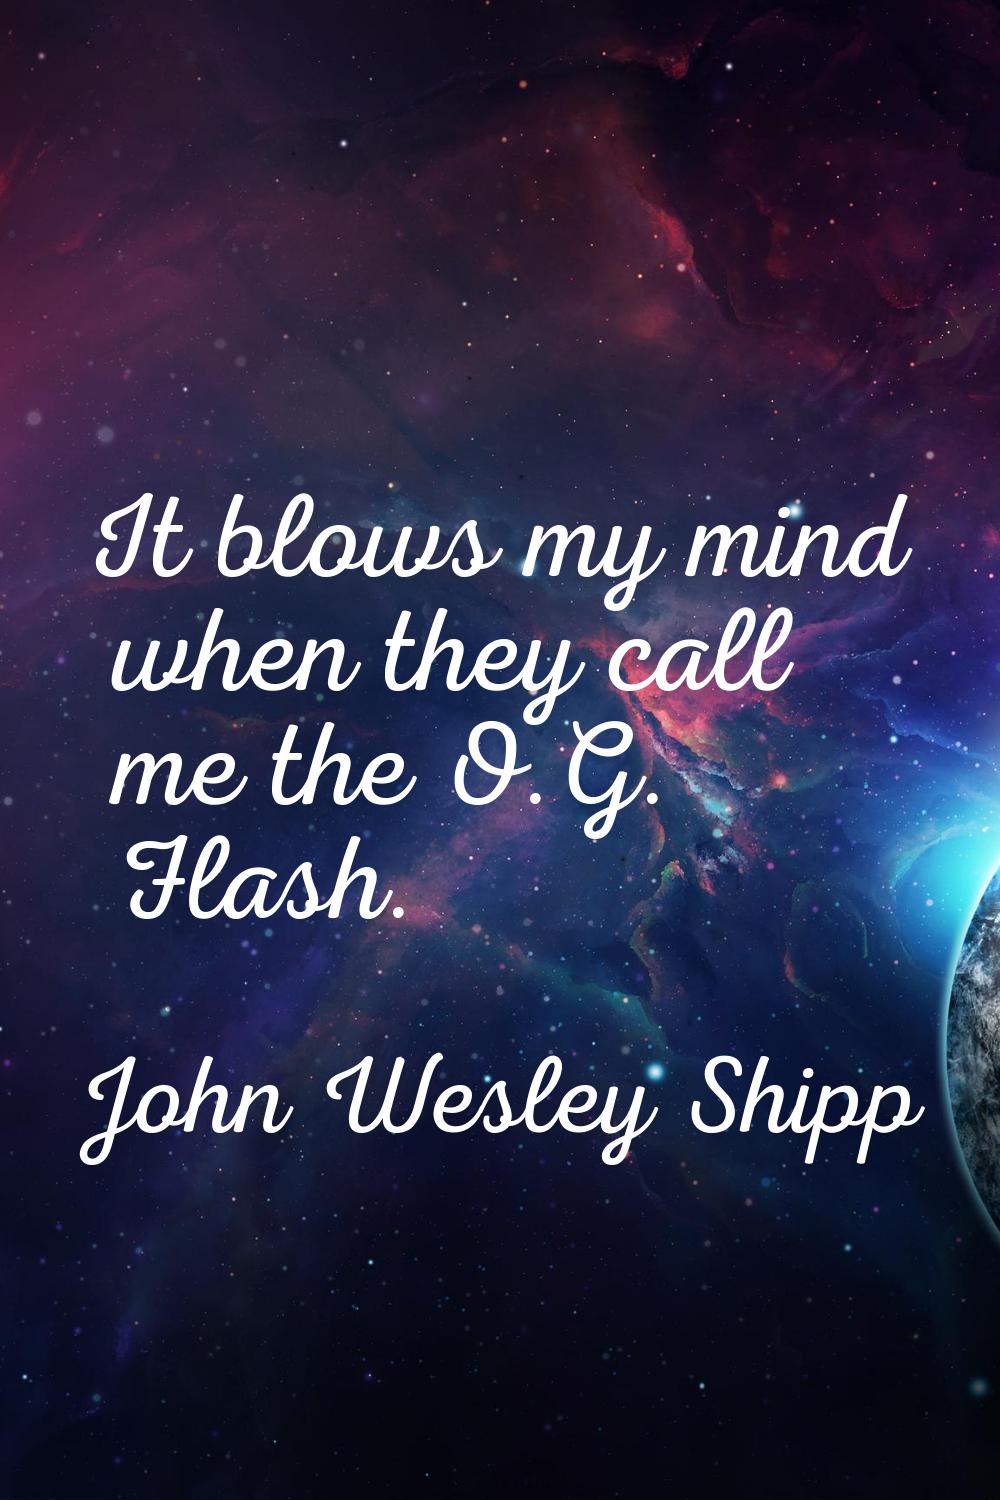 It blows my mind when they call me the O.G. Flash.